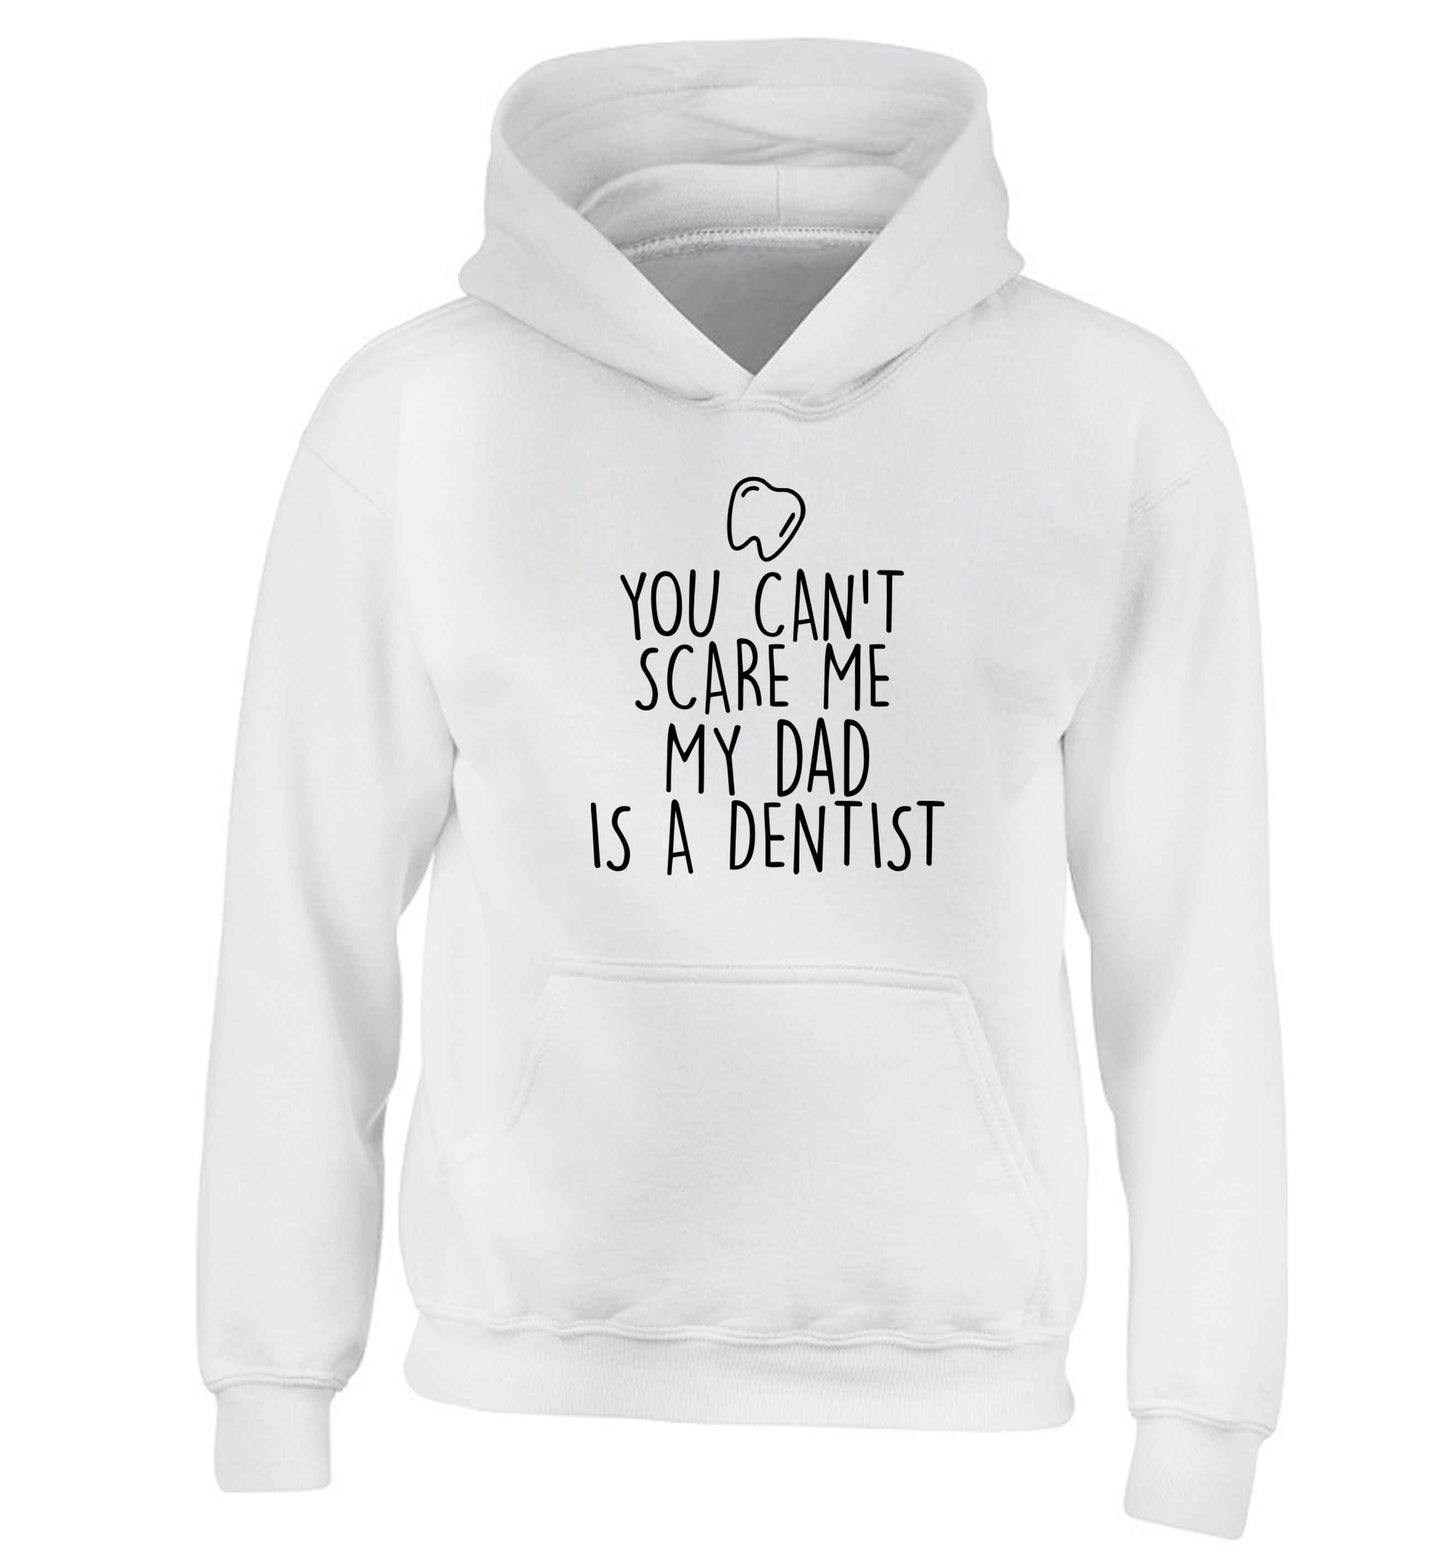 You can't scare me my dad is a dentist children's white hoodie 12-13 Years